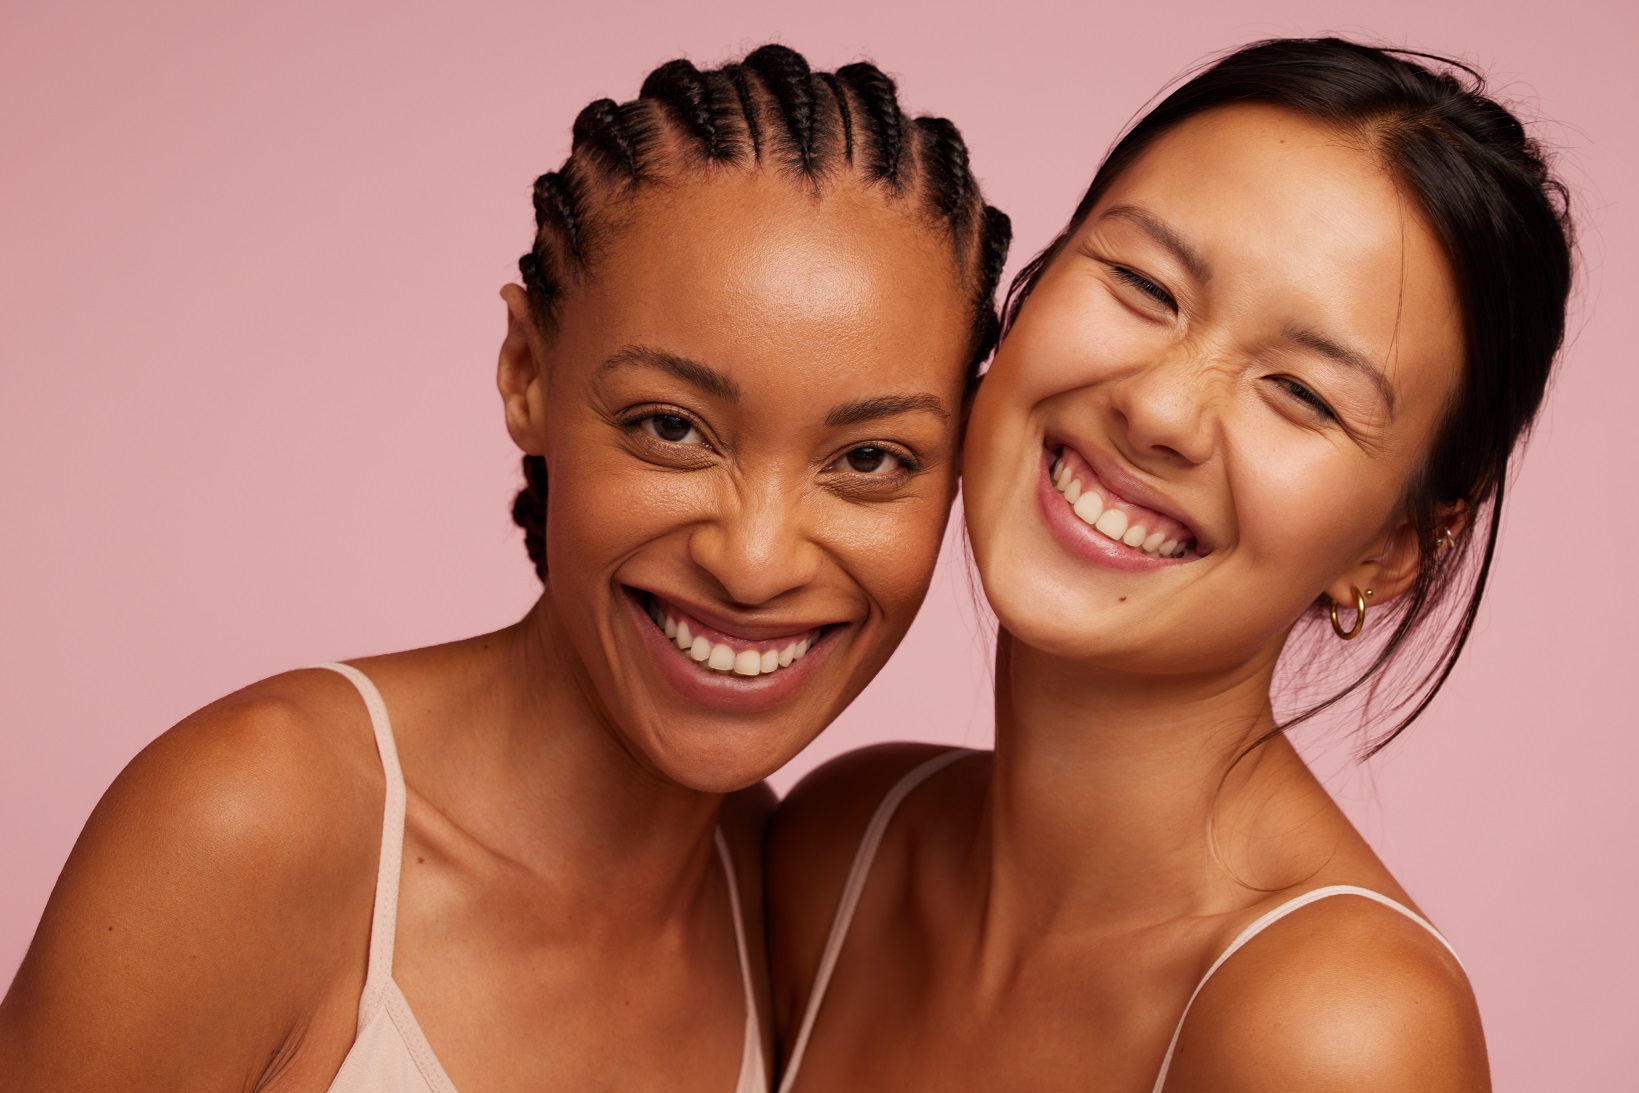 Asian and African Beautiful Smiling Woman | Avail Aesthetics in Cary, NC